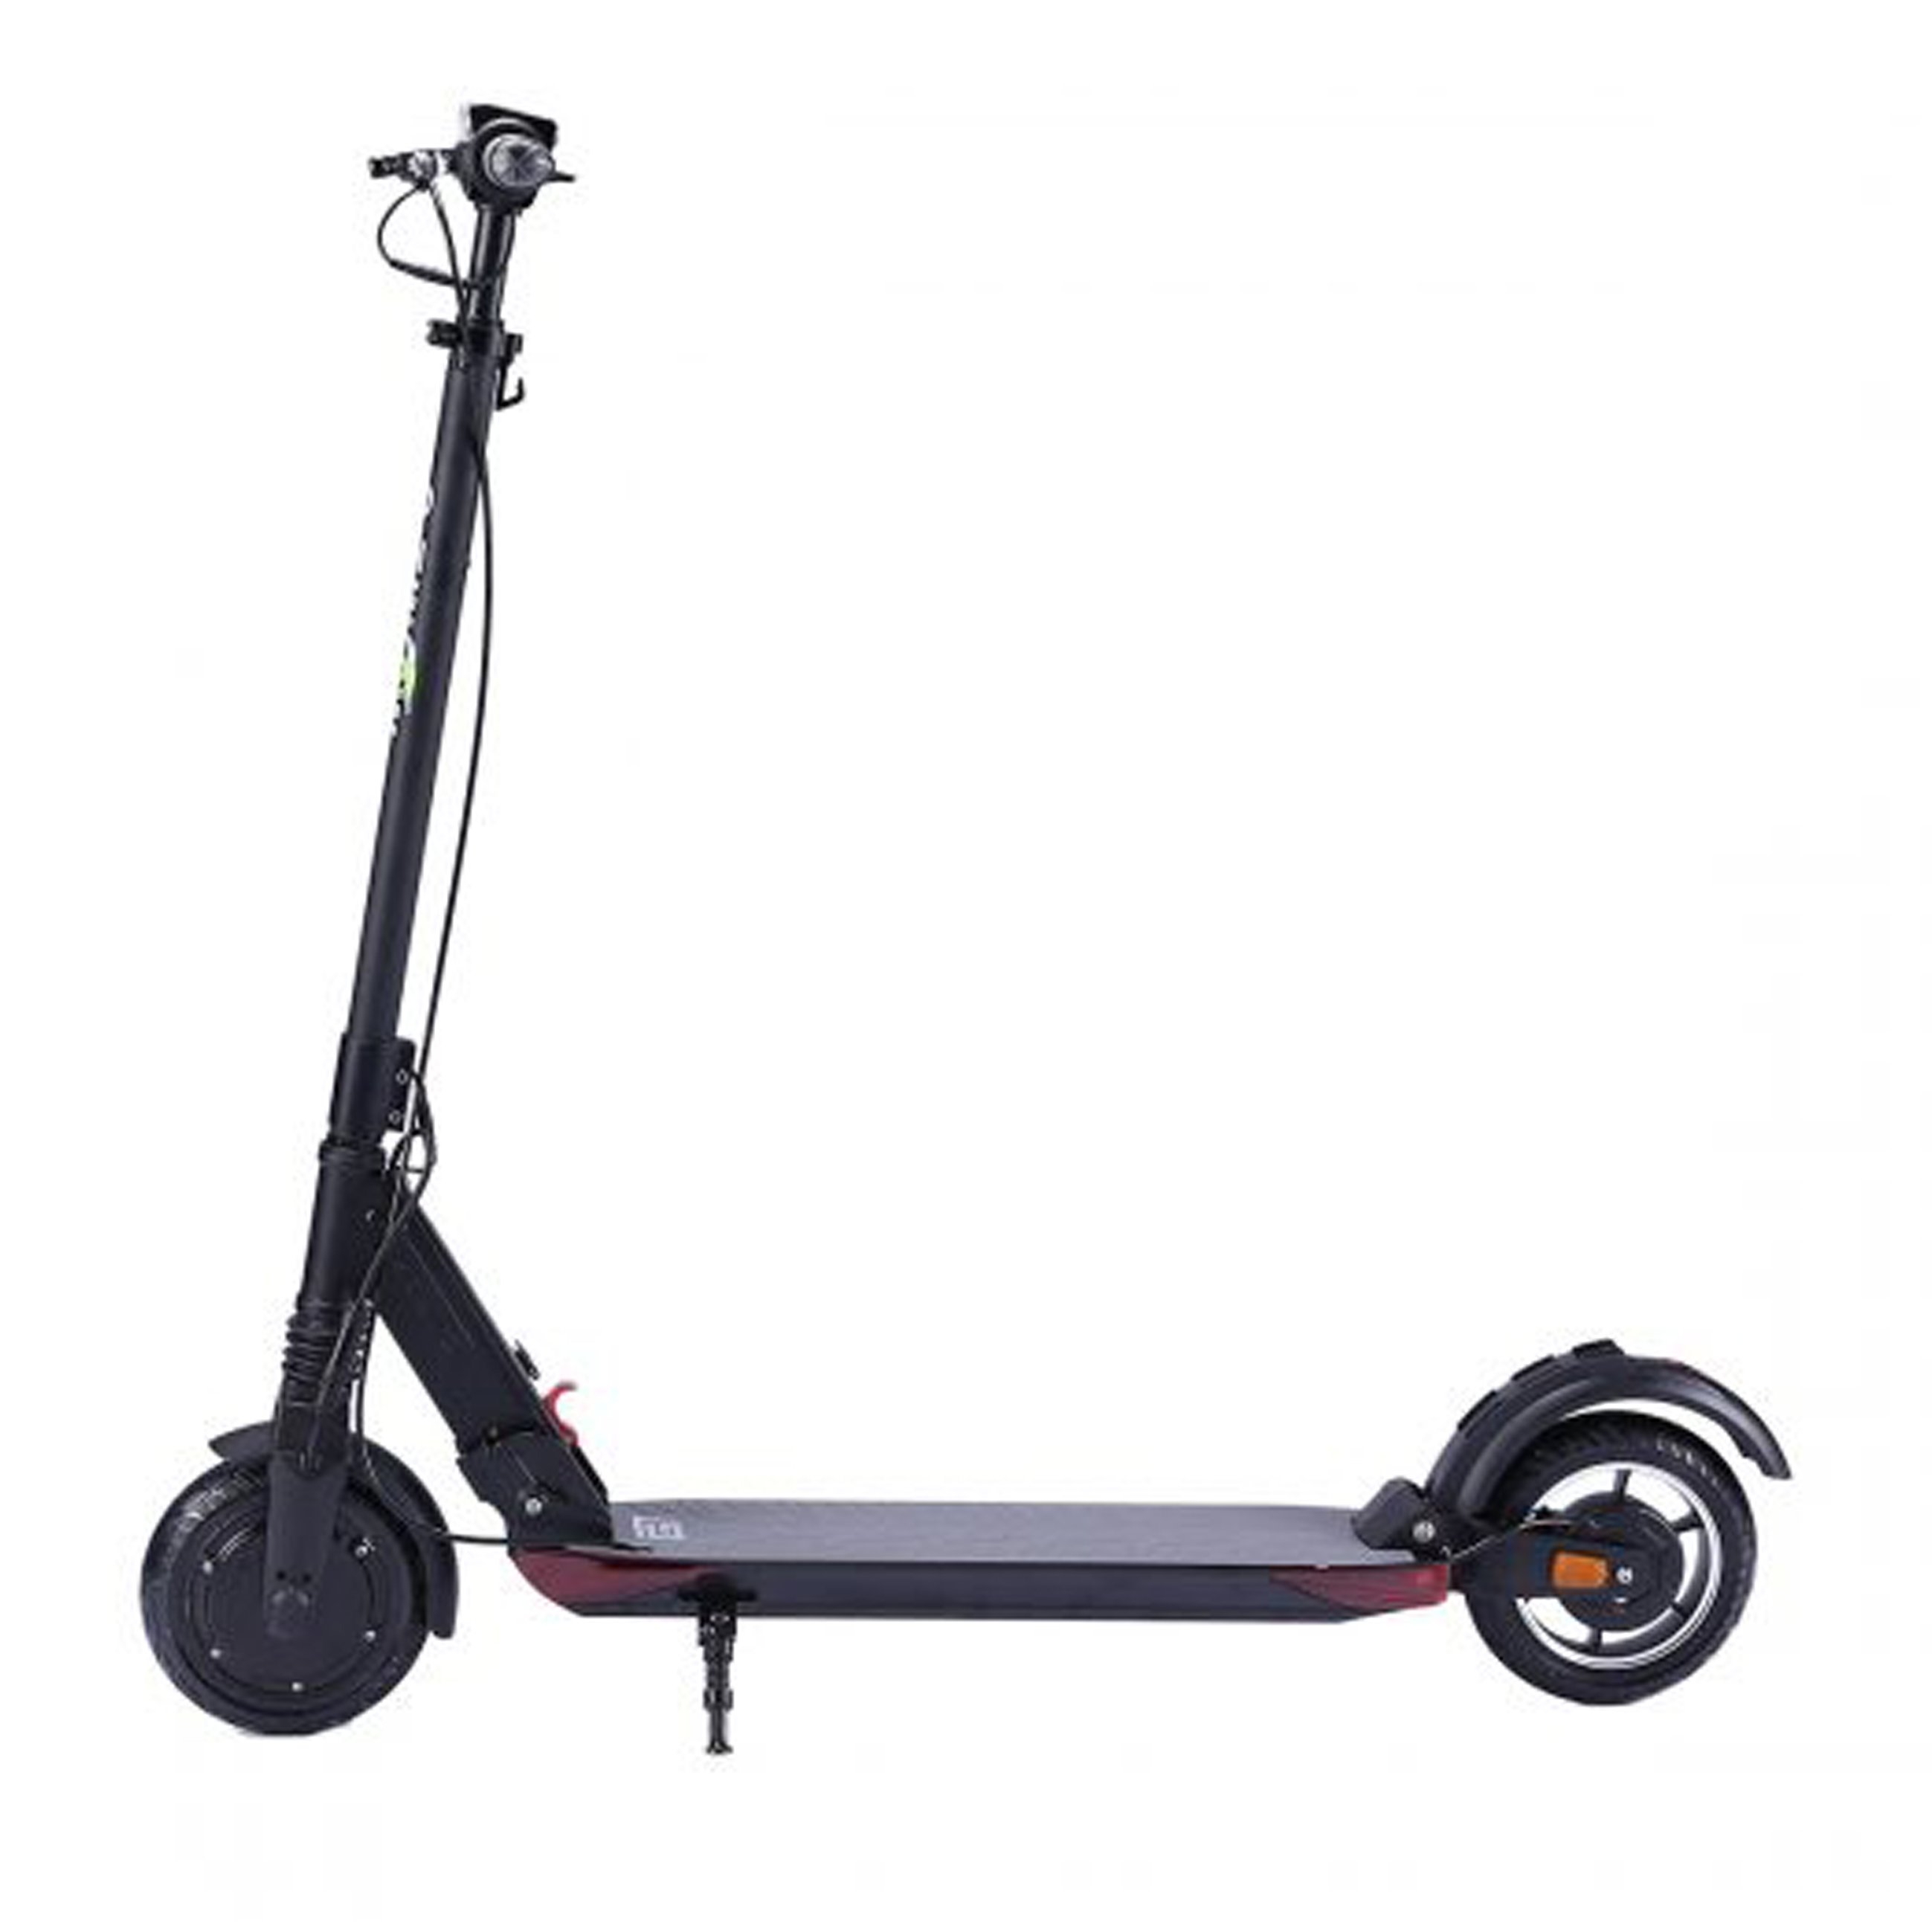 E-Twow Booster GT 2020 Electric Scooter – Black